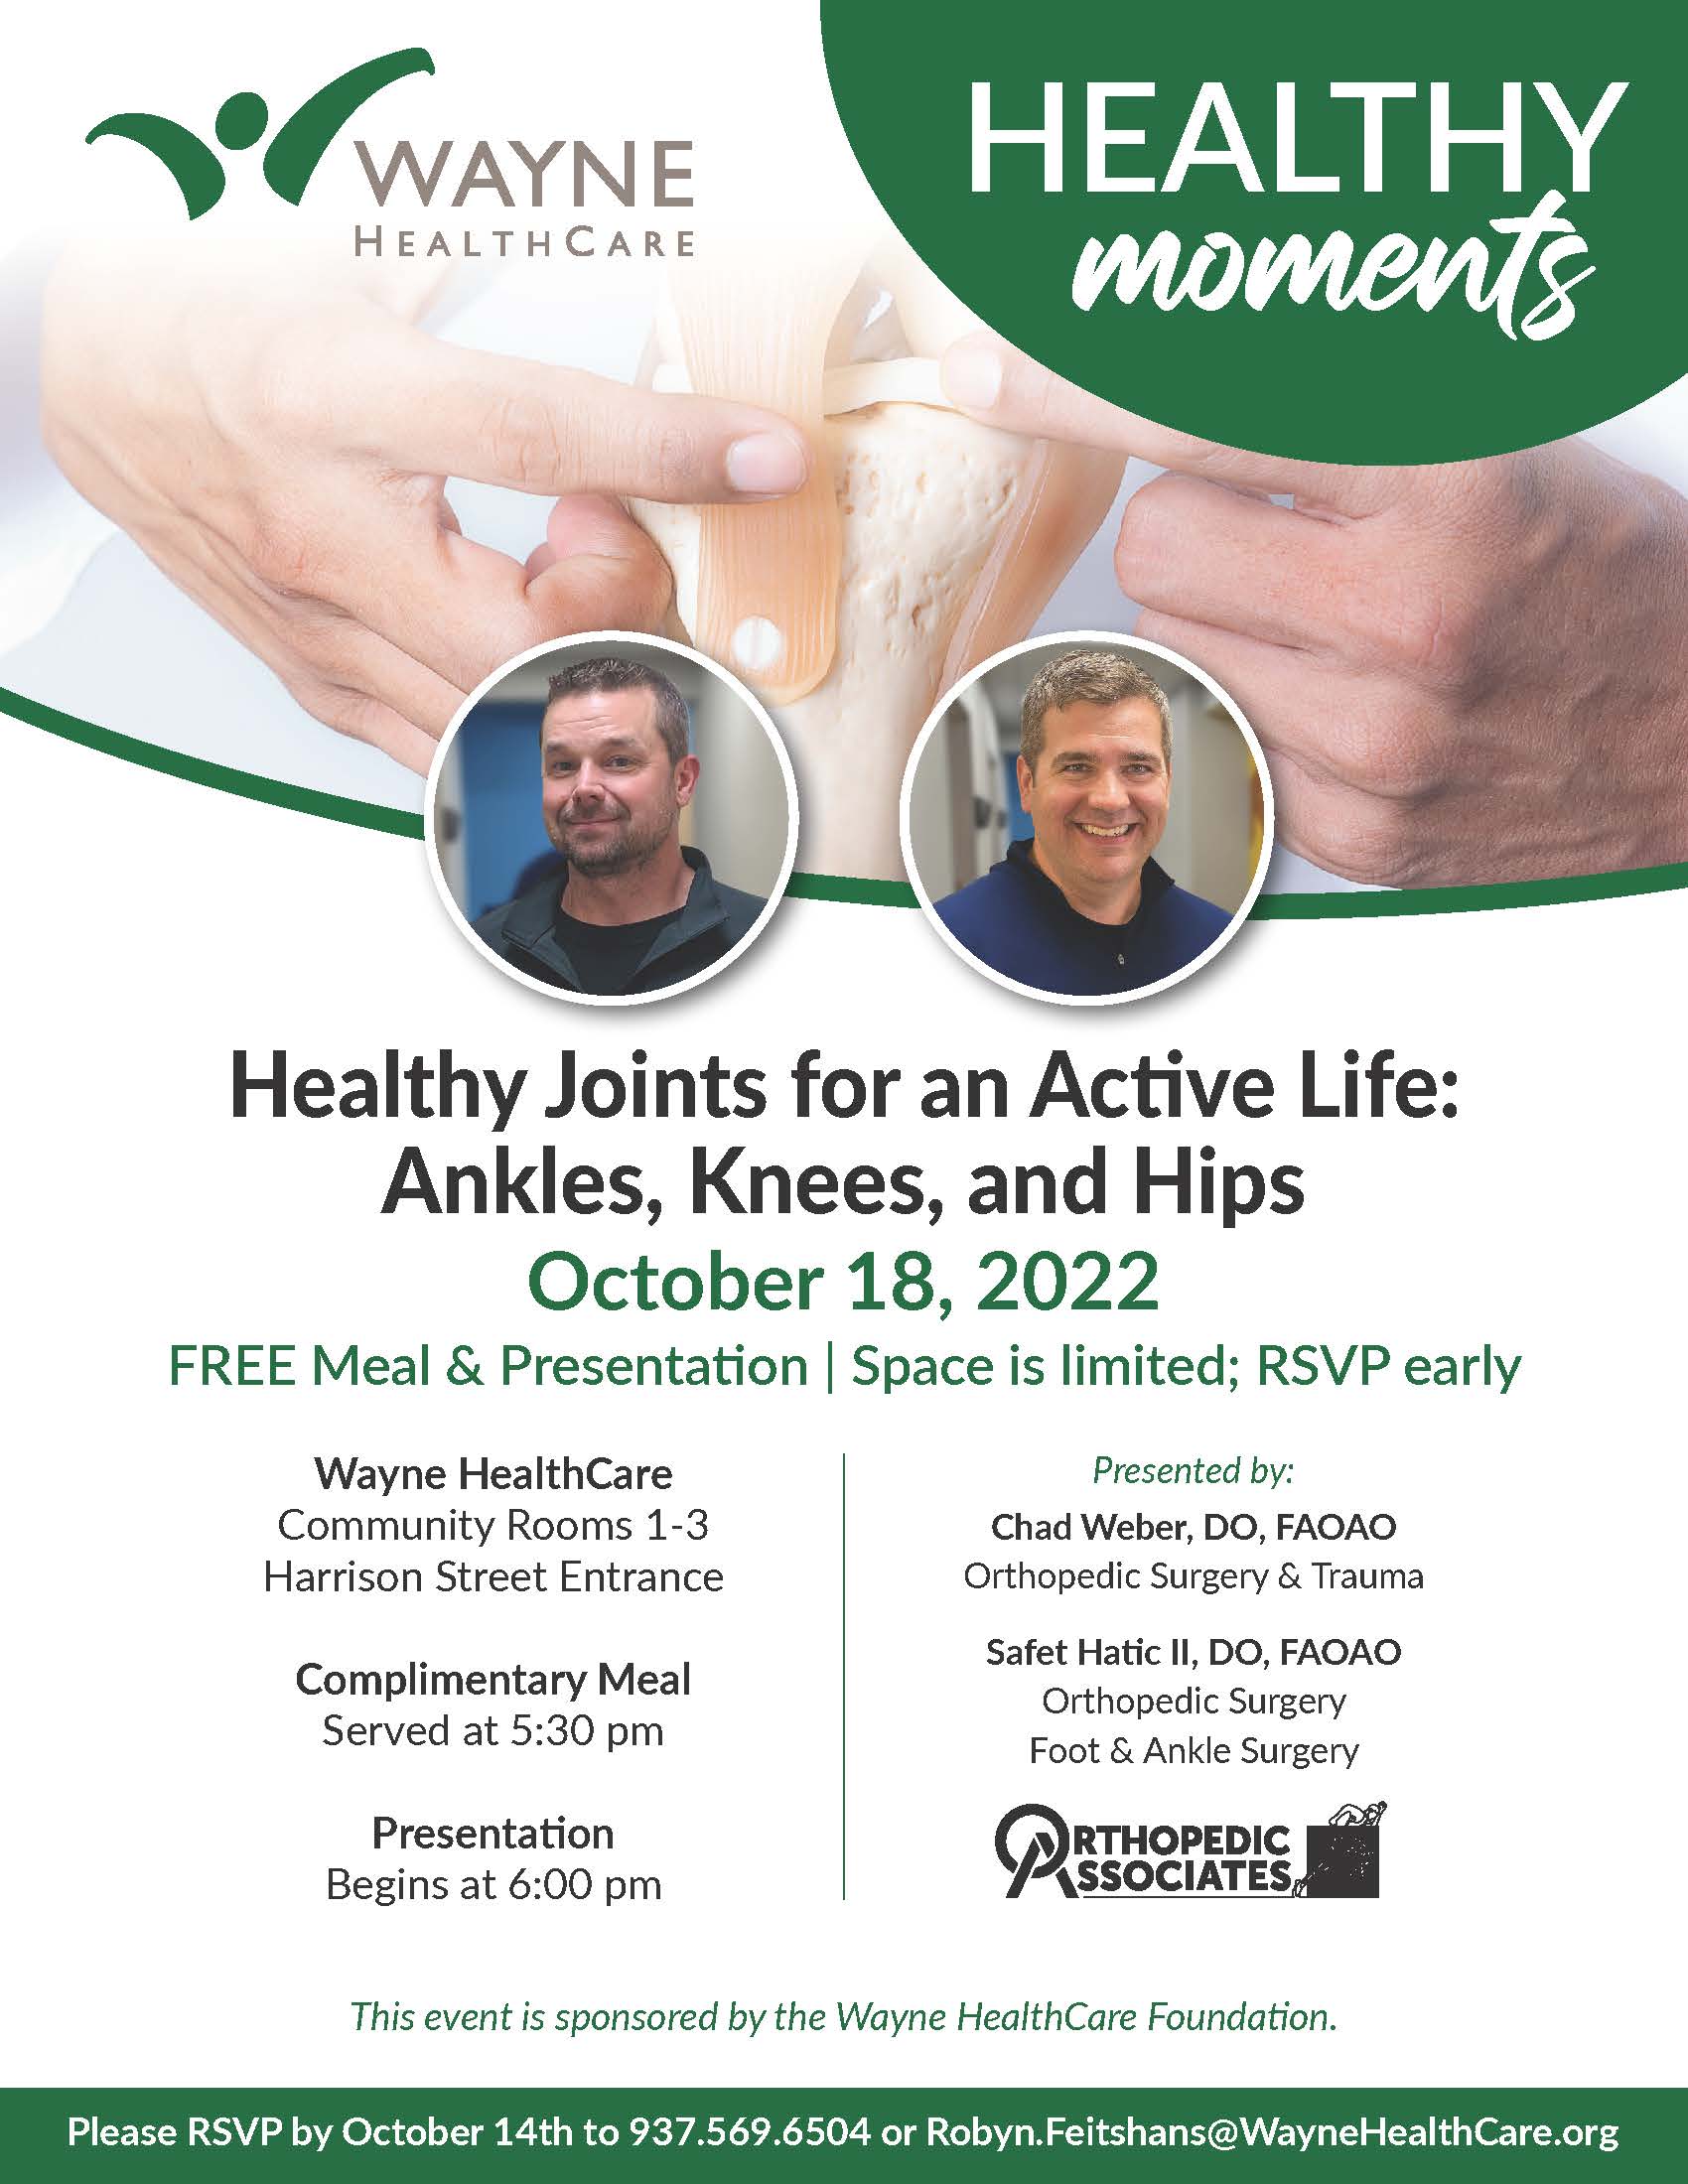 Healthy Moments Flyer with Dr. Weber and Dr. Hatic II